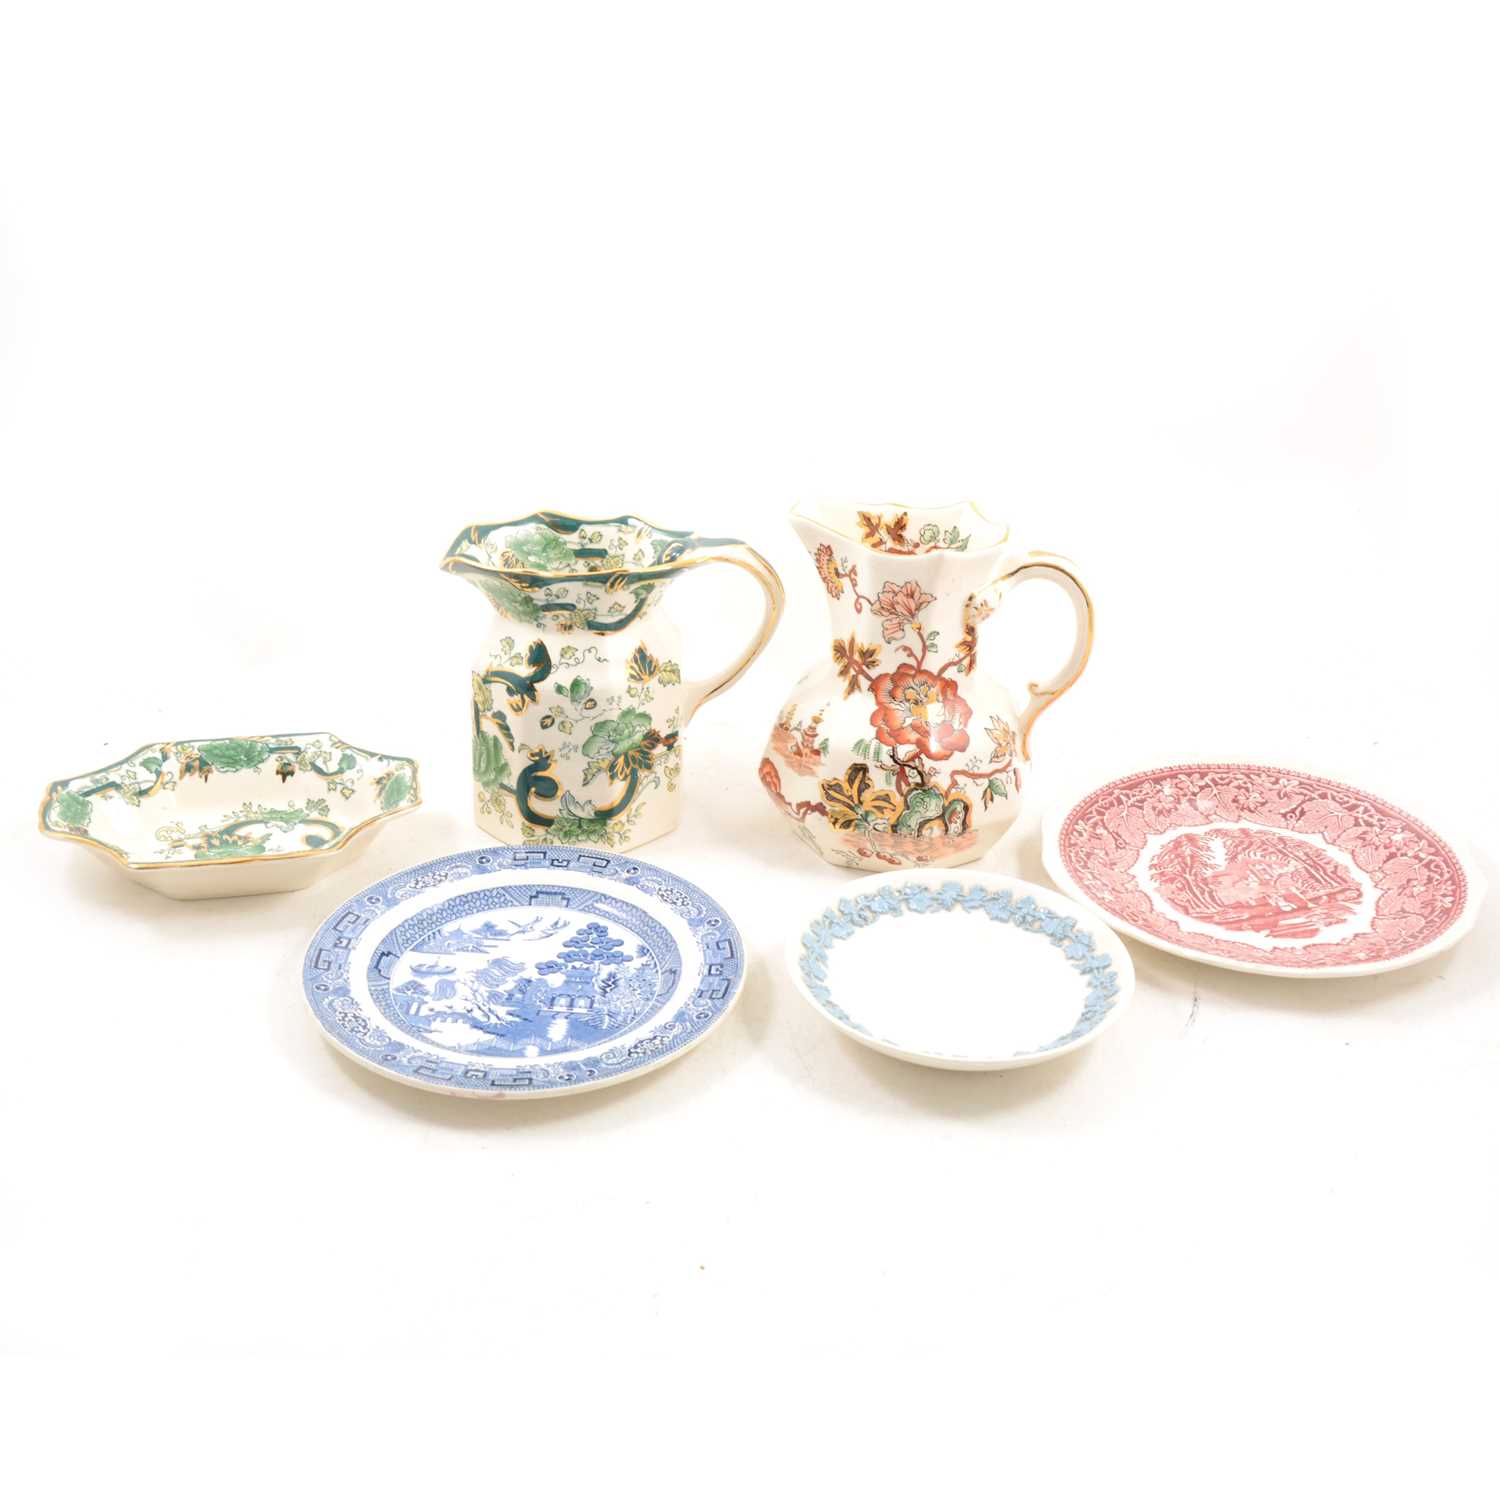 Lot 1036 - A quantity of Masons and Wedgwood pottery